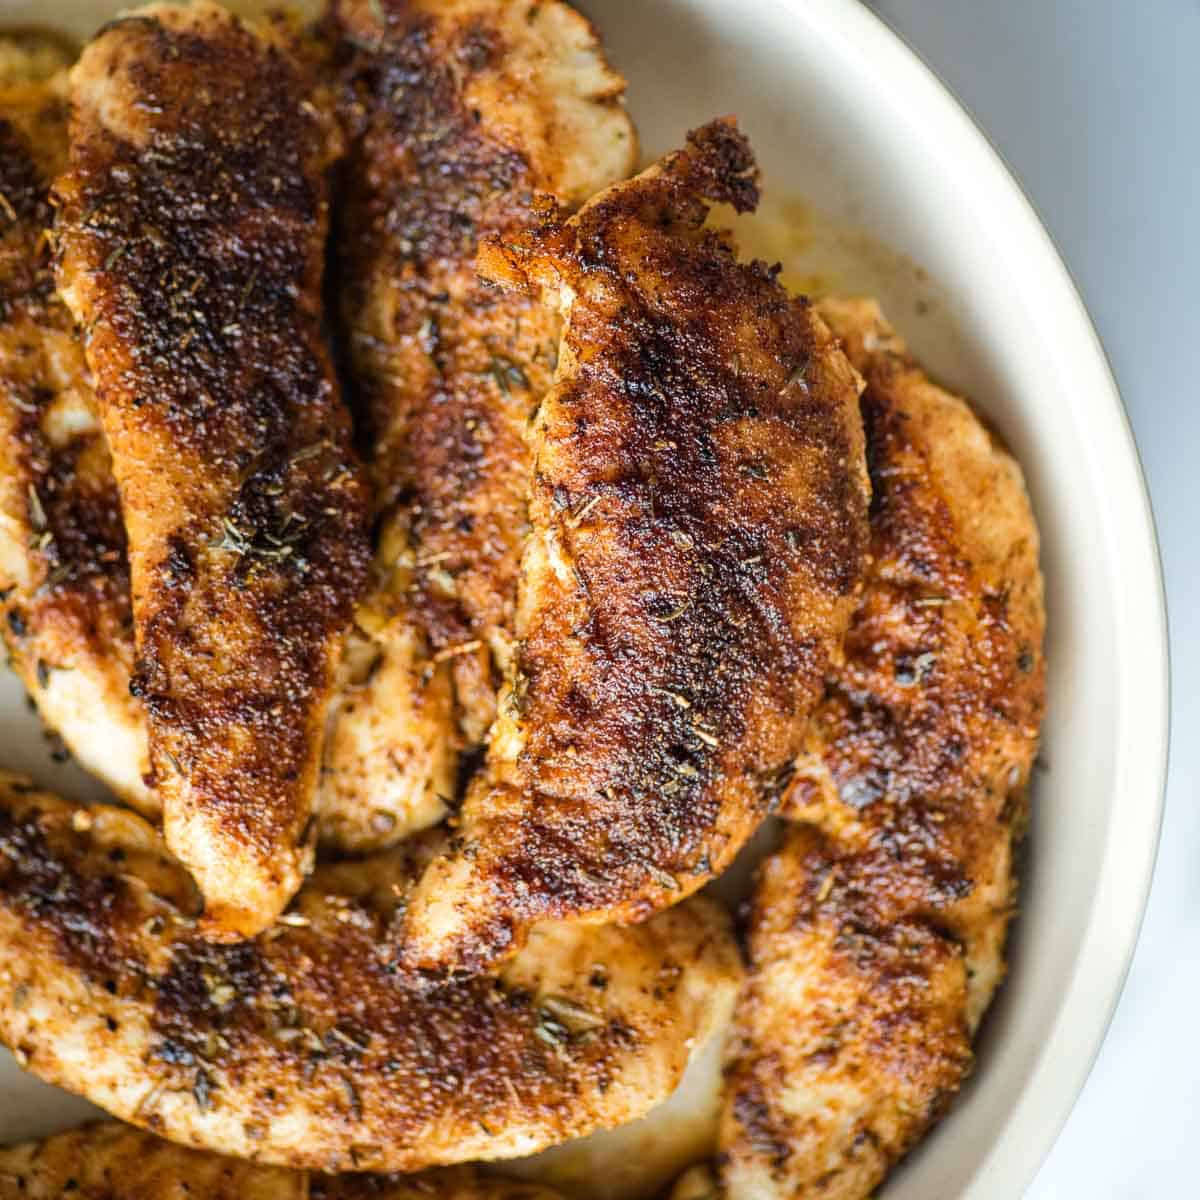 Blackened chicken tenders in a white dish.